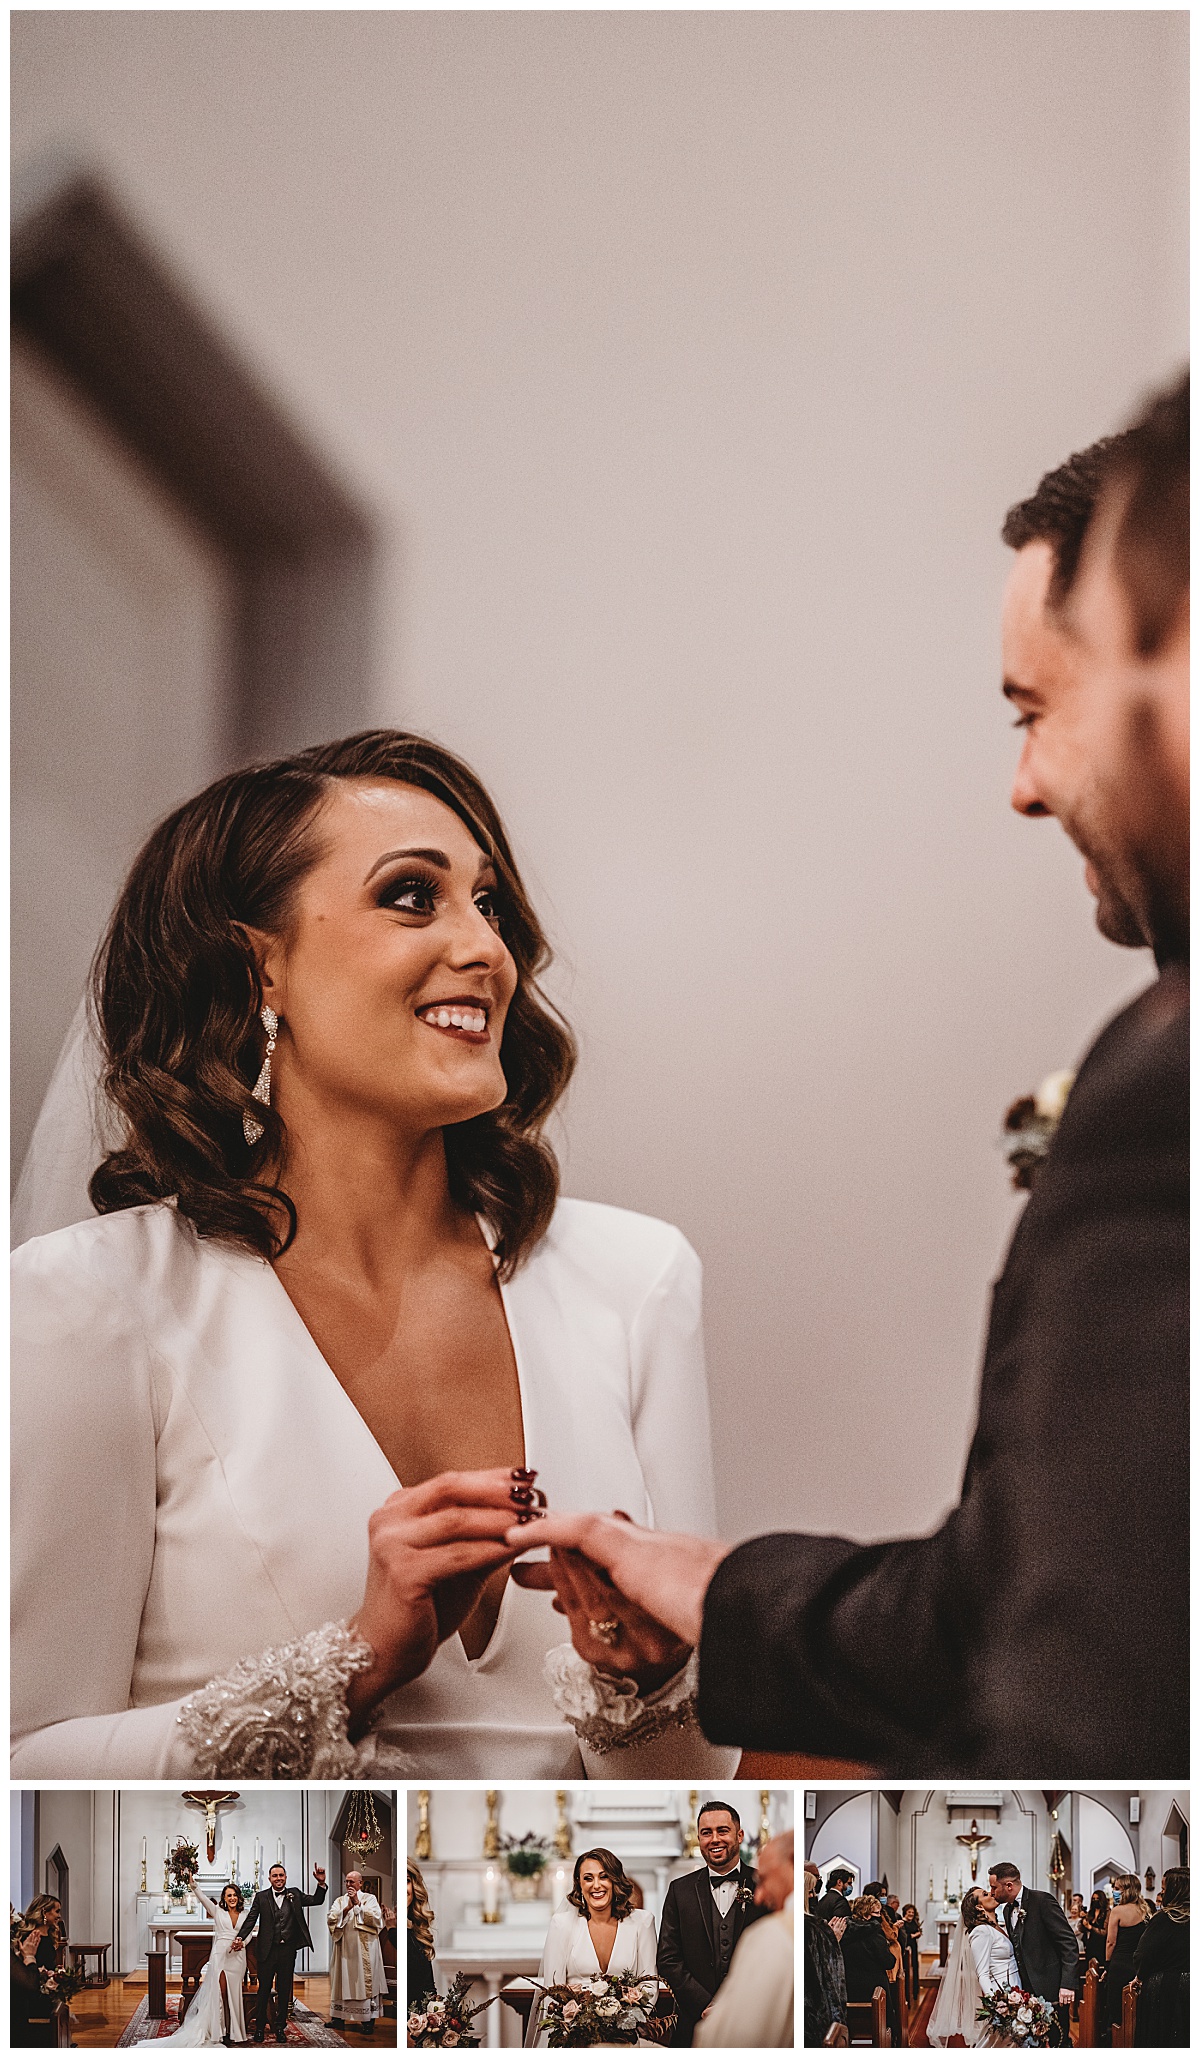 Wedding ceremony for a moody winter wedding in Baltimore by Brittany Dunbar Photography, a Baltimore Wedding Photographer.